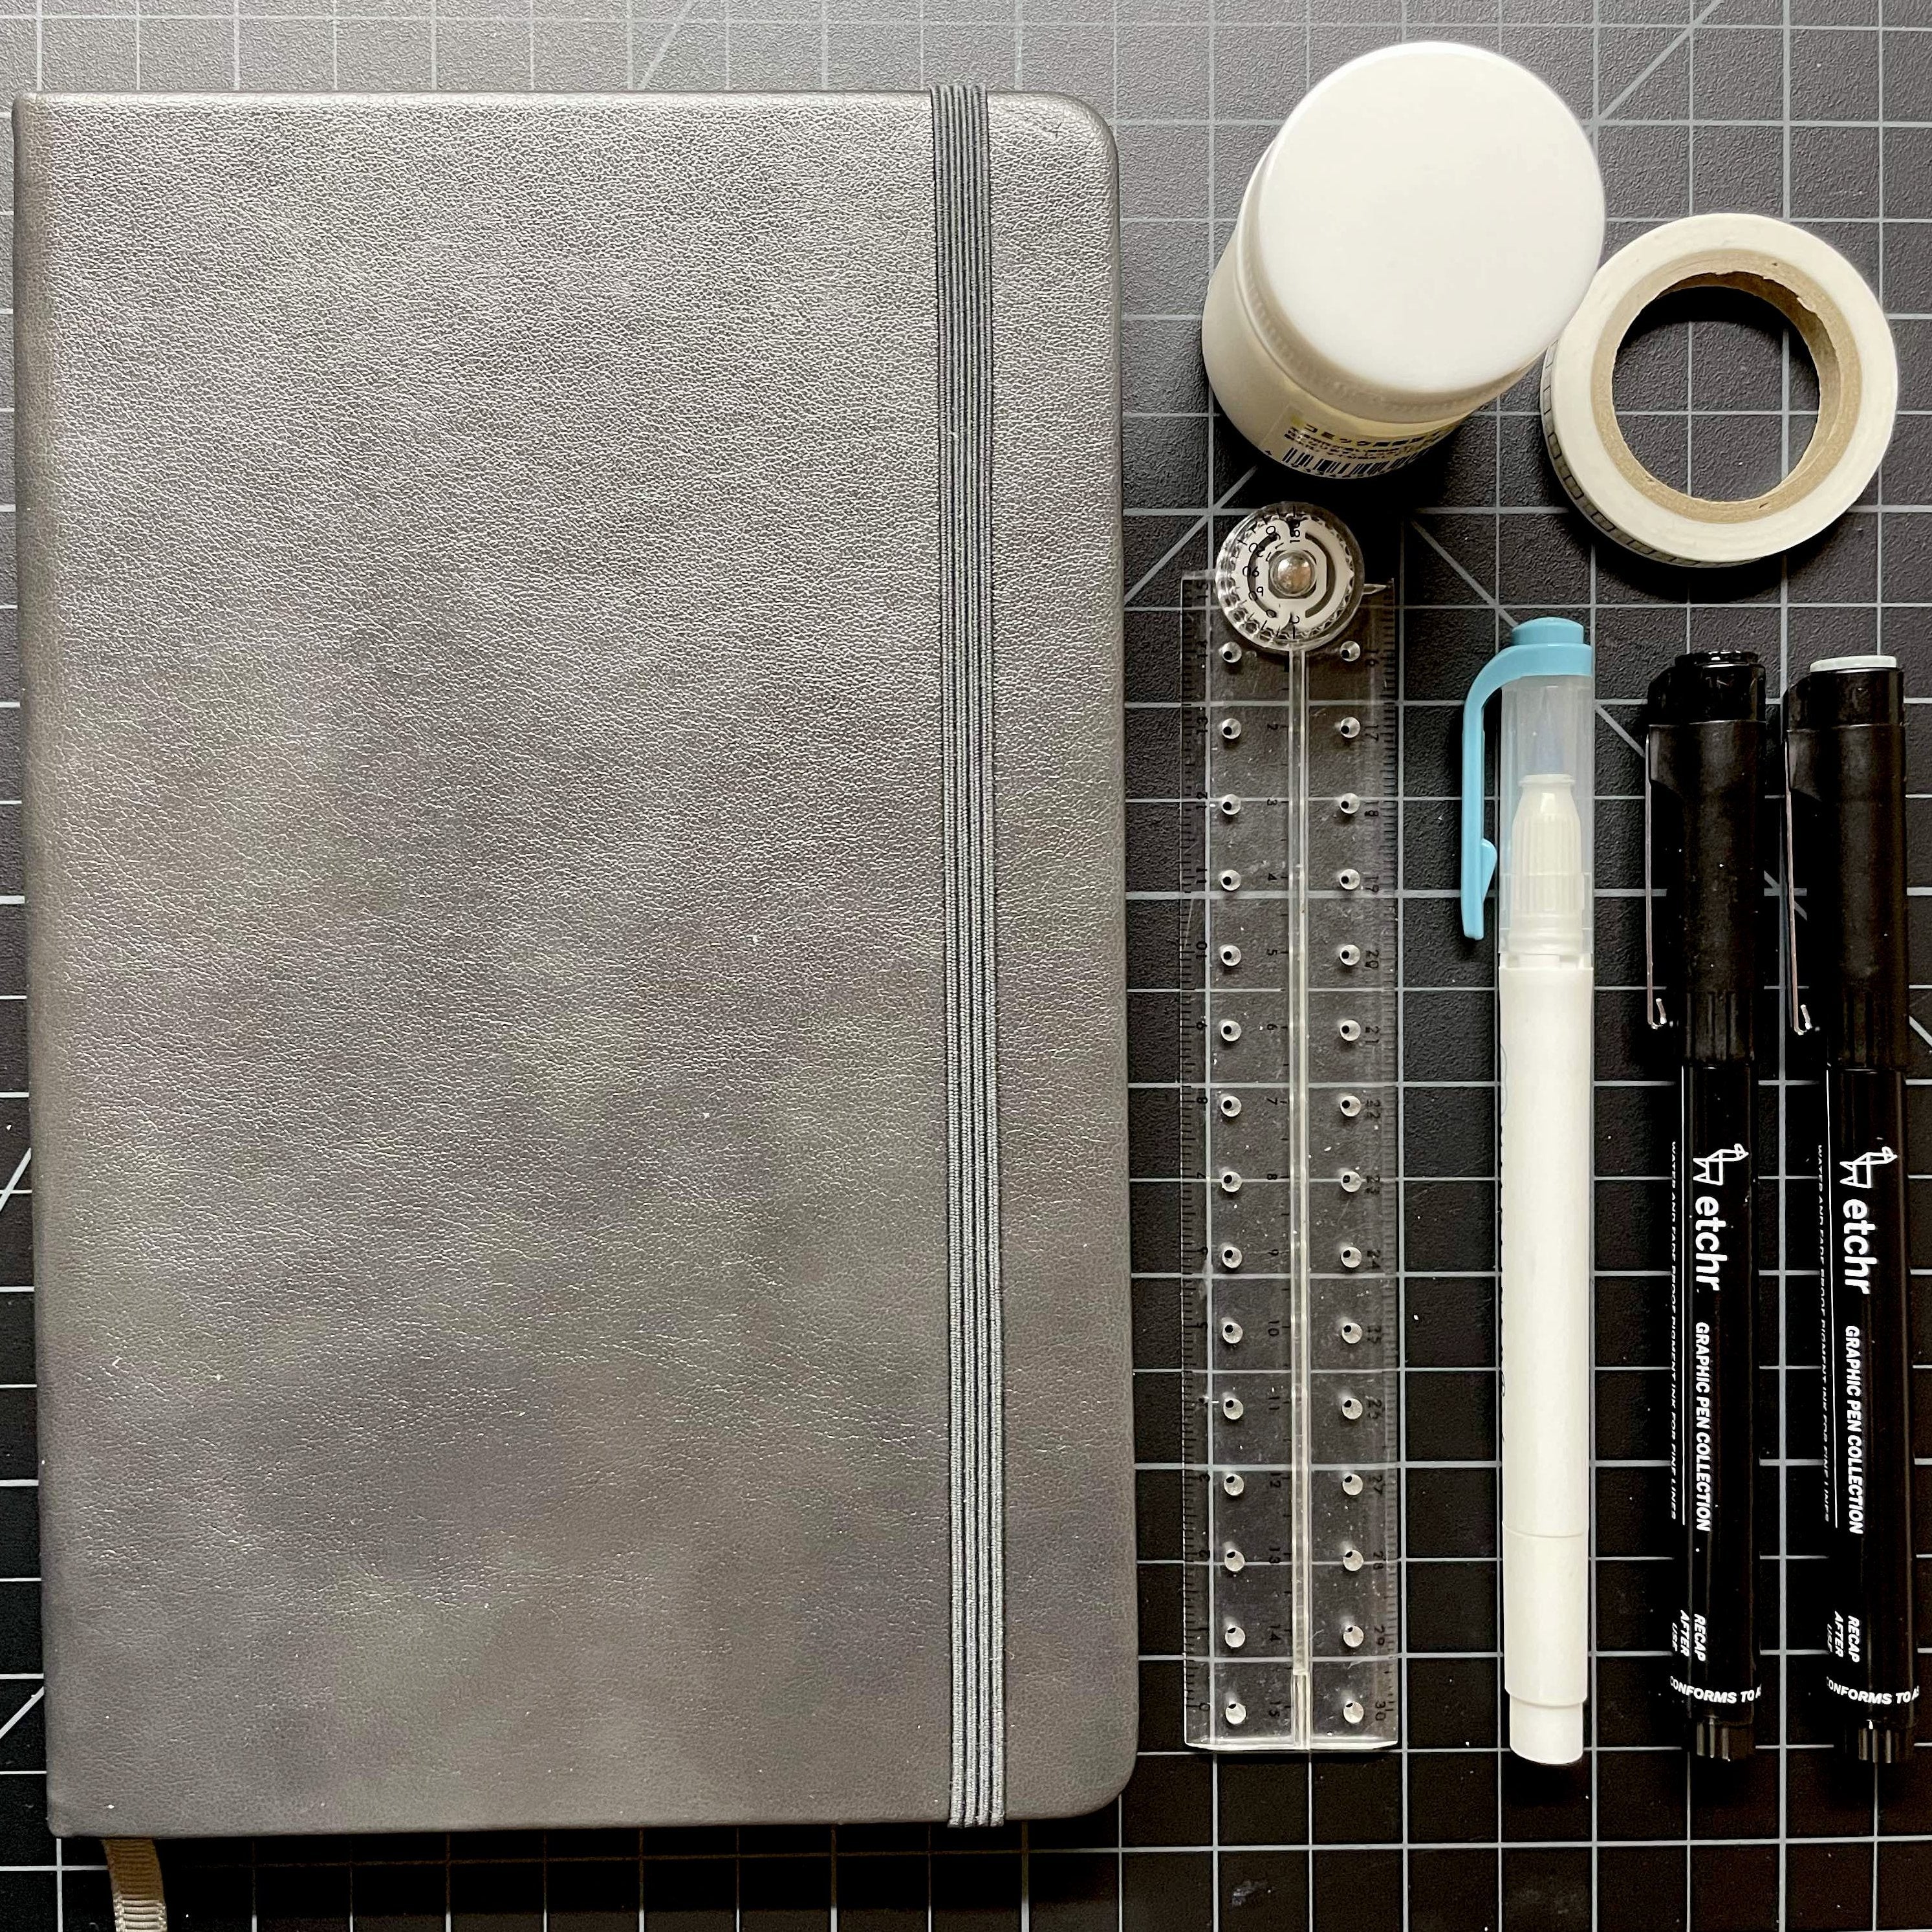 Choosing a Dot Grid Journal? Avoid These Mistakes : The Grid Tool